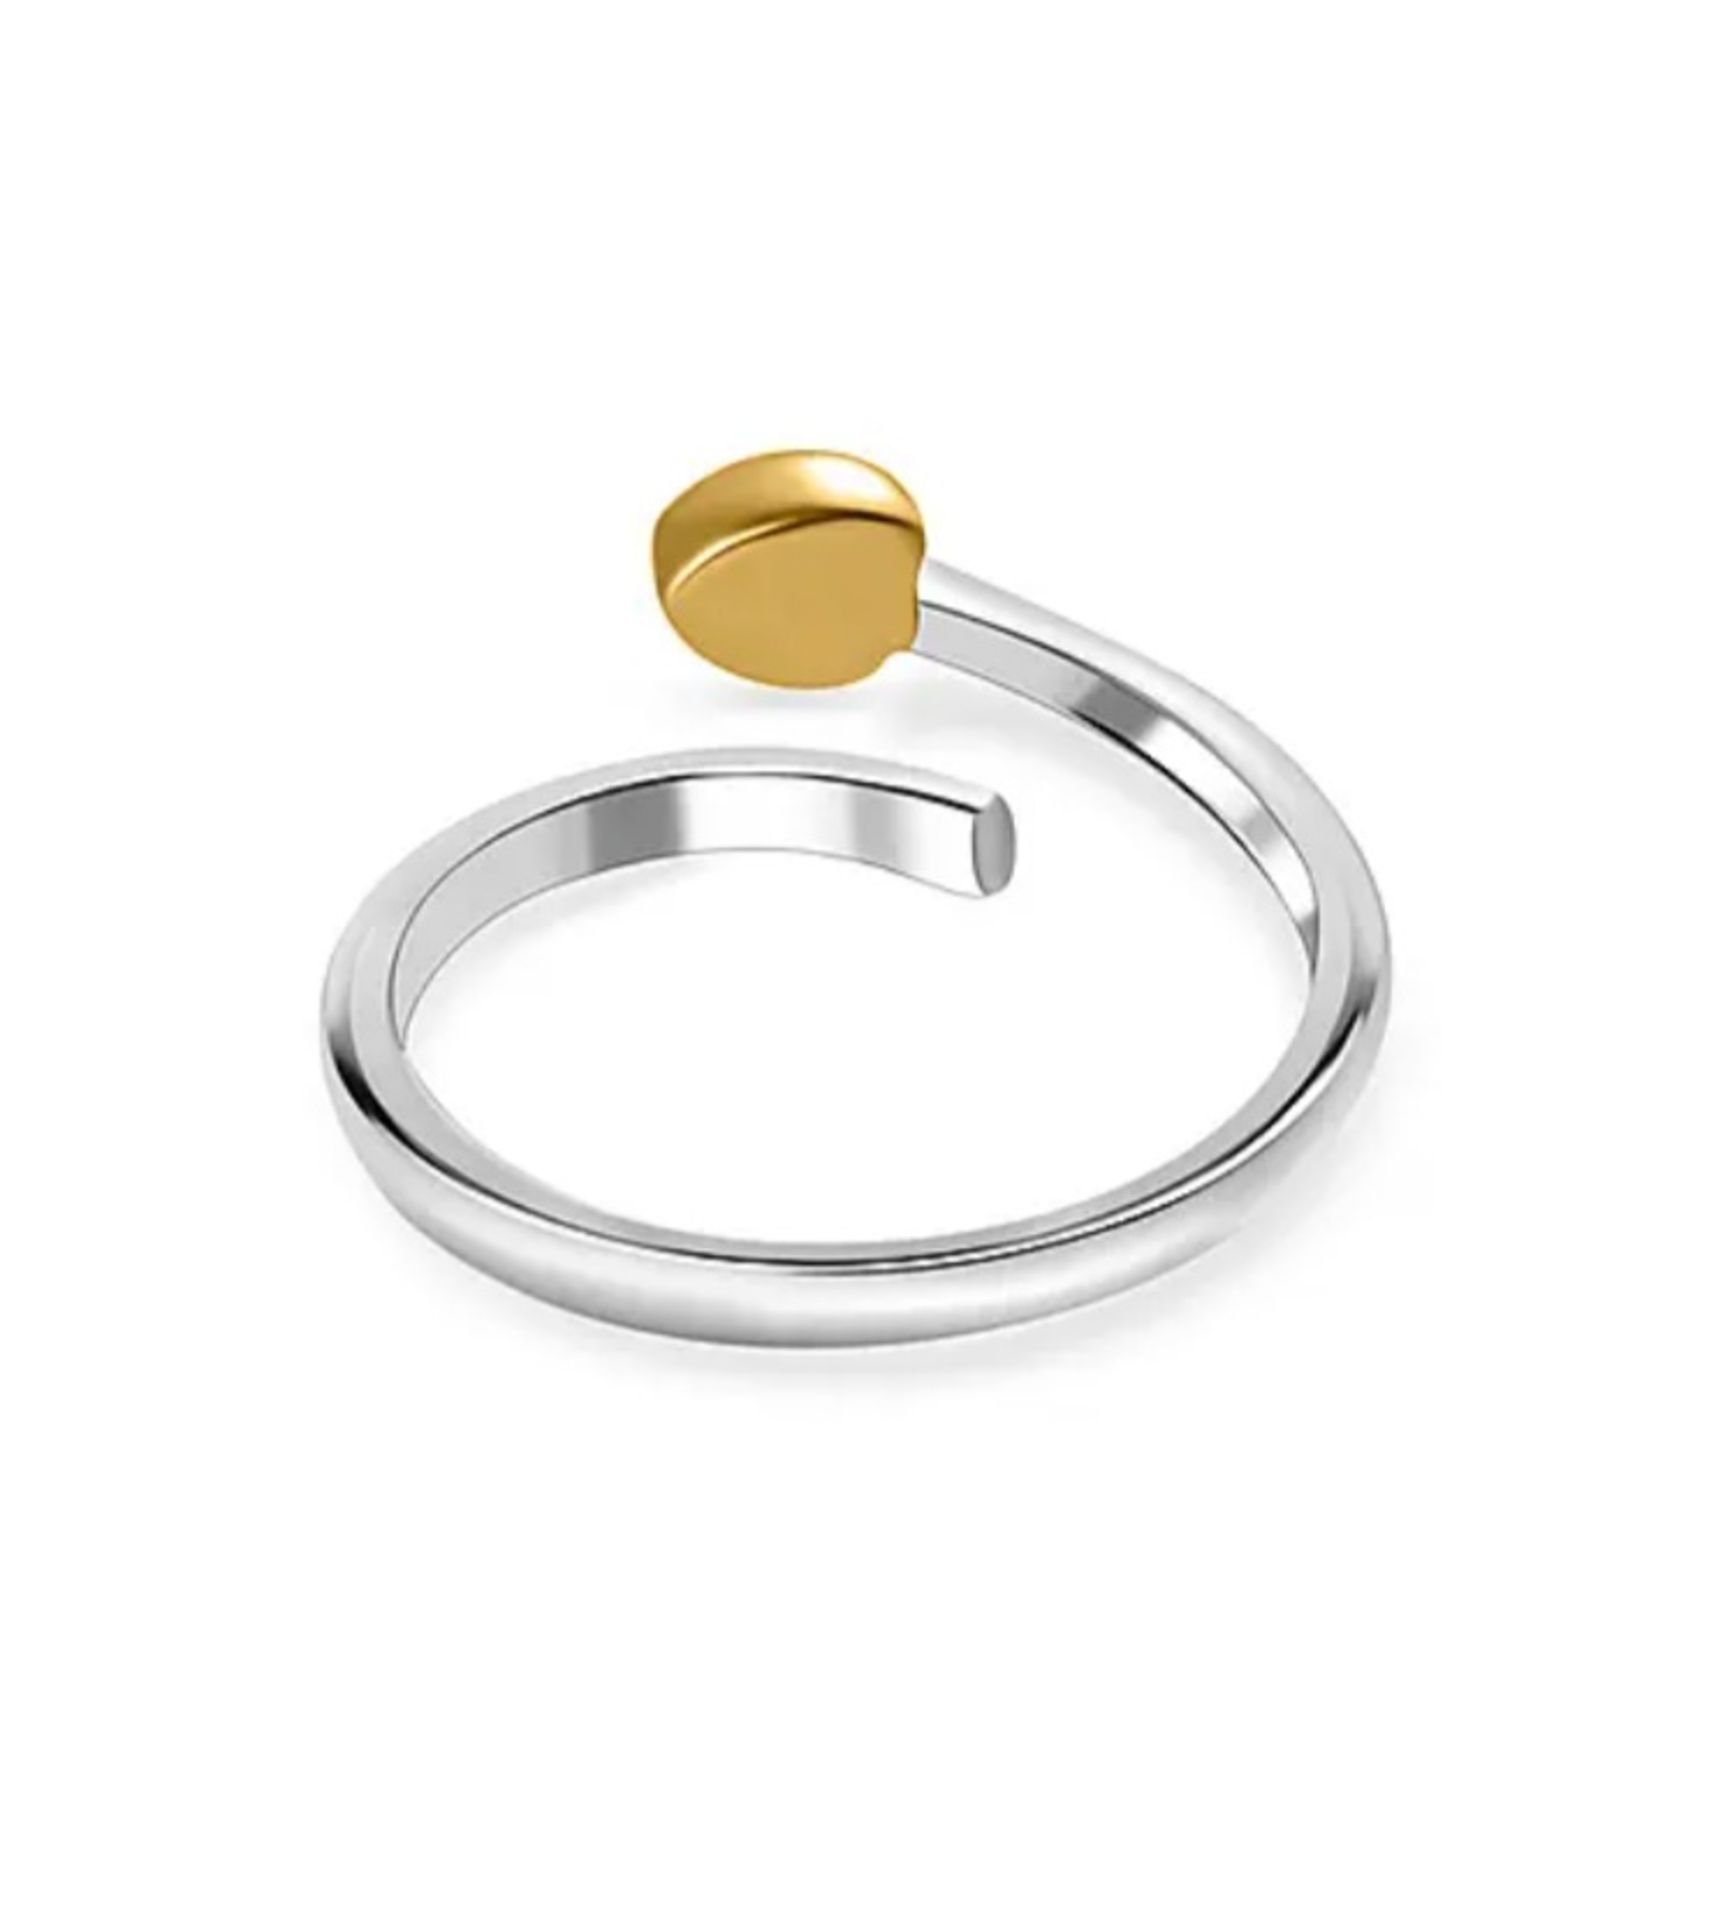 NEW! Platinum and 18K Yellow Gold Vermeil Plated Sterling Silver Adjustable Heart Ring - Image 5 of 5